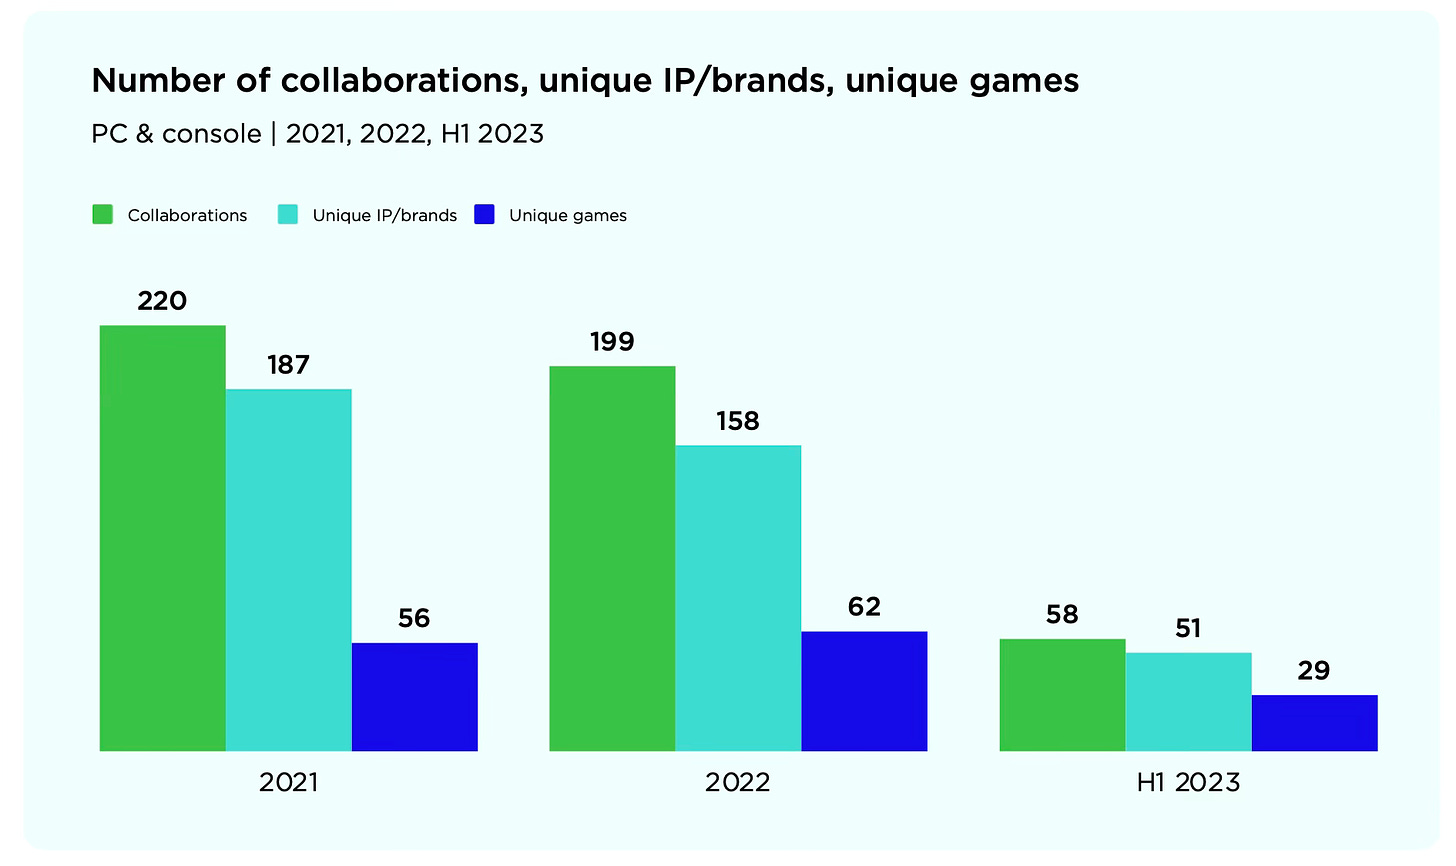 Number of unique collaborations games